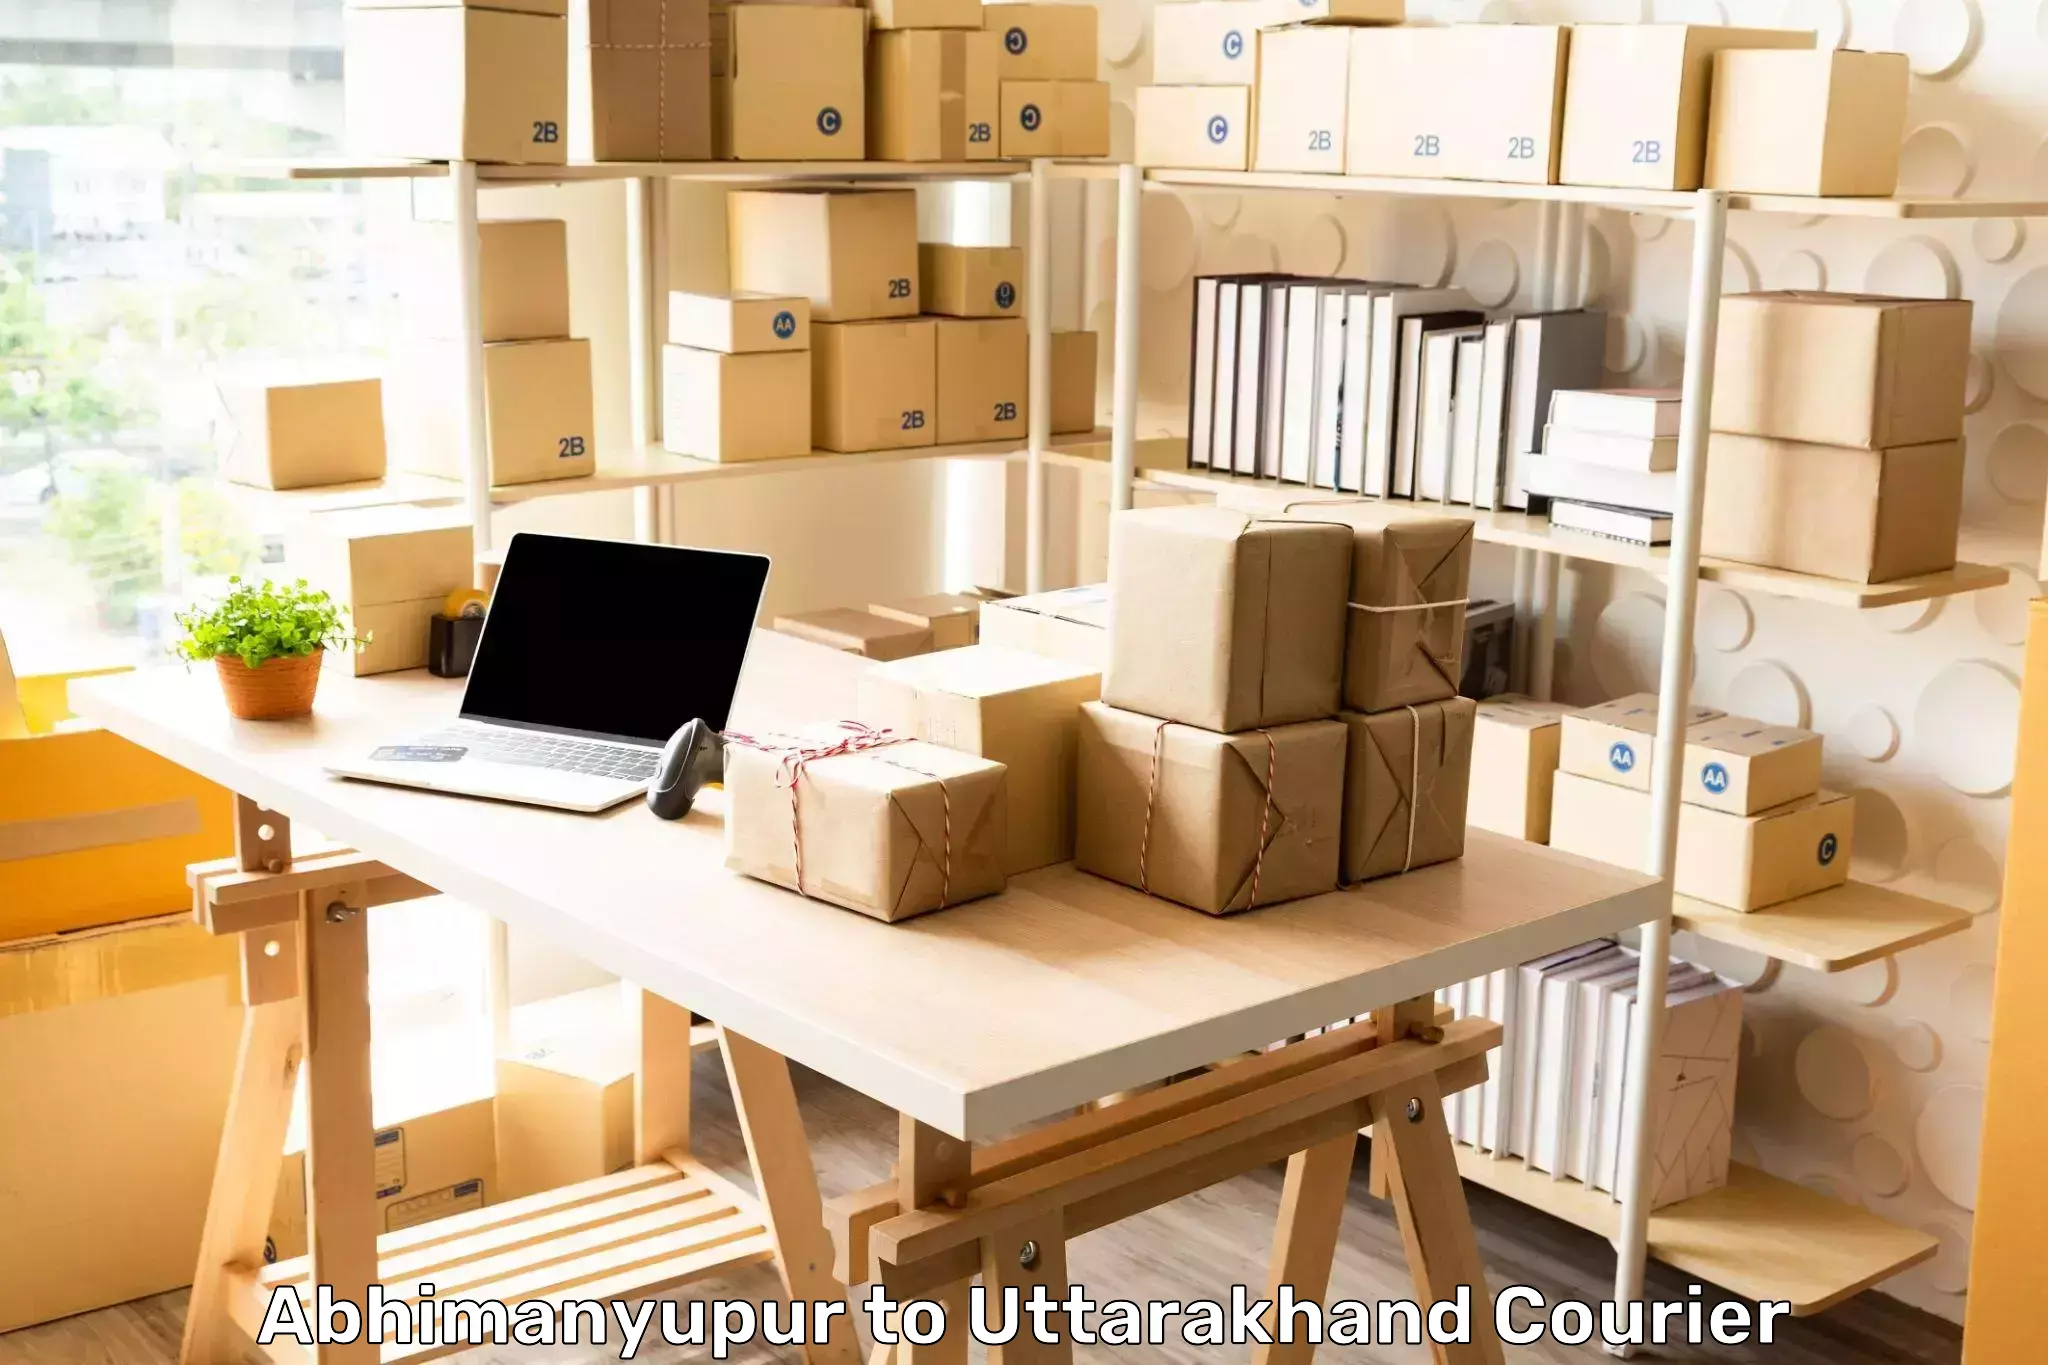 Modern parcel services Abhimanyupur to Paithani